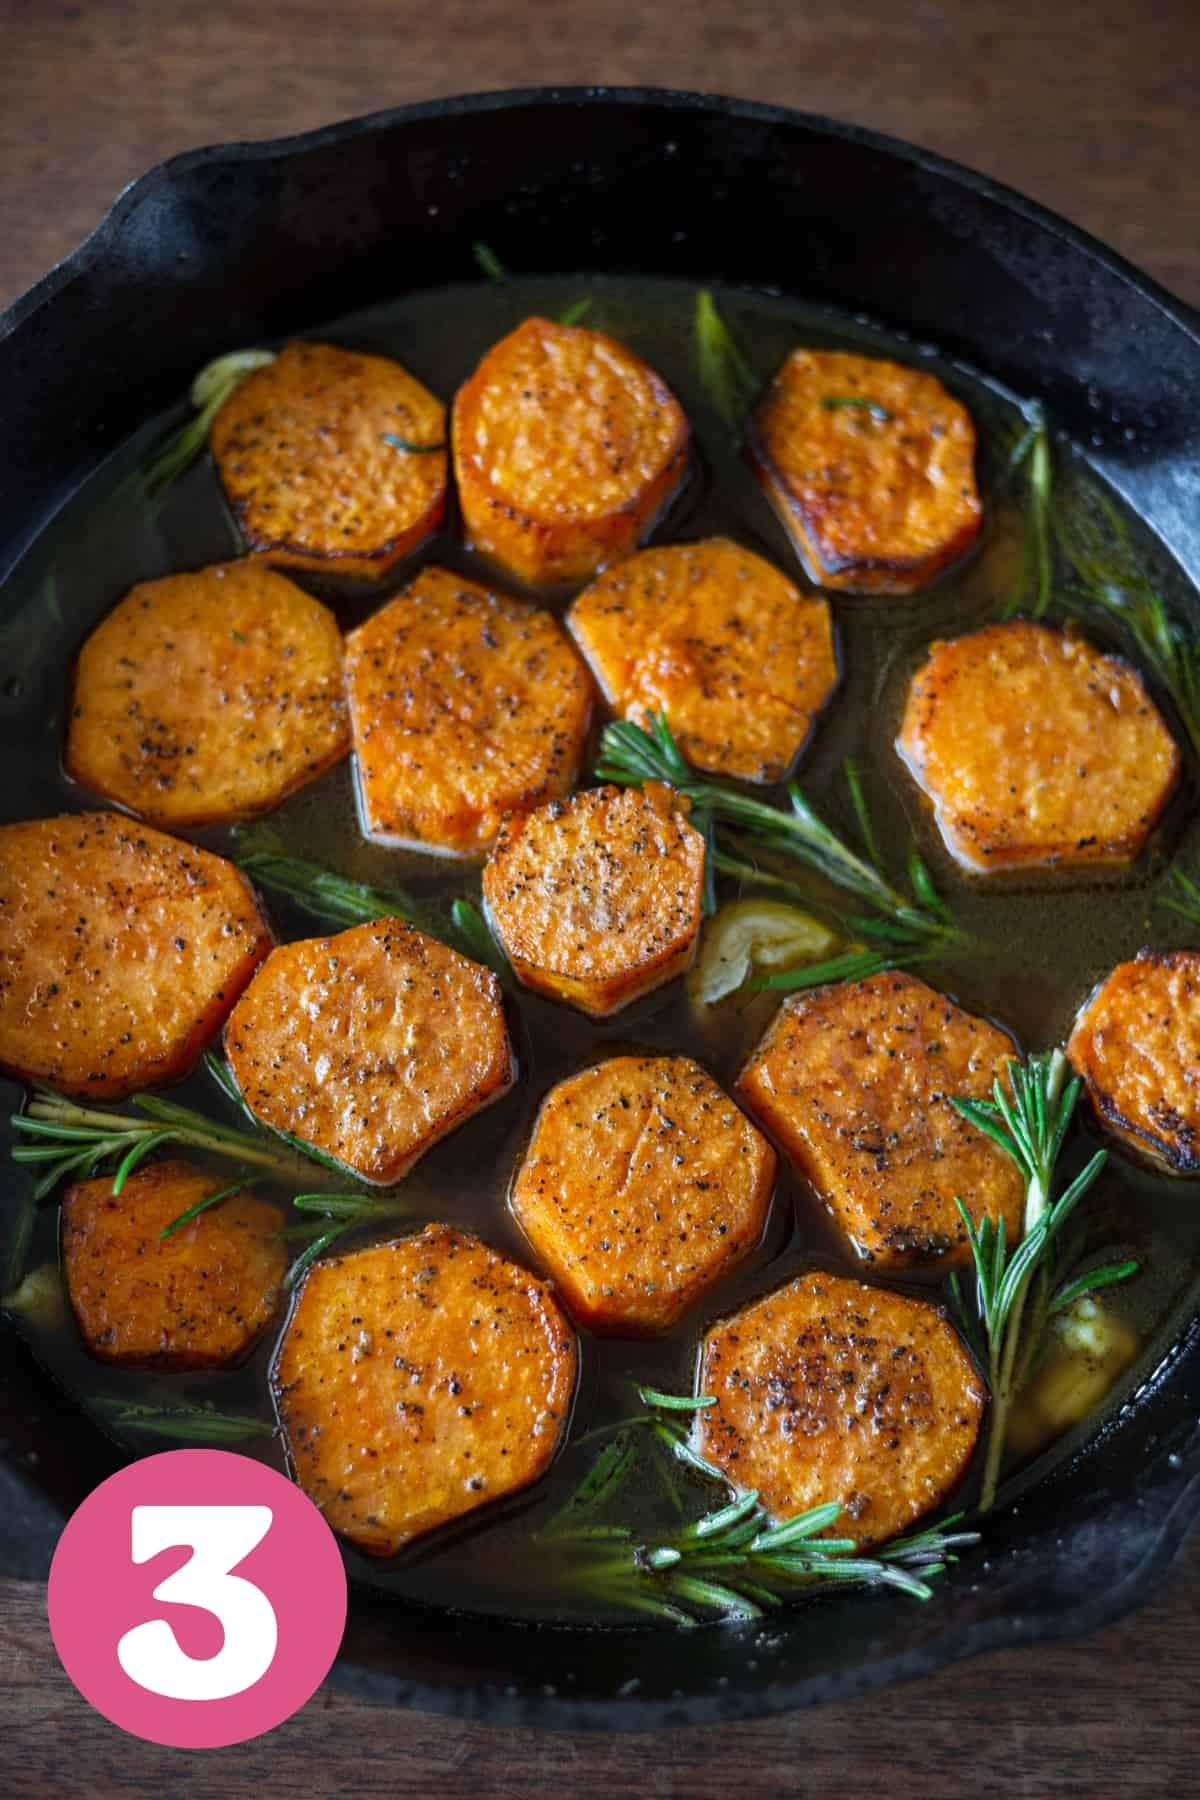 A cast iron pan of fondant sweet potatoes with chicken broth and rosemary